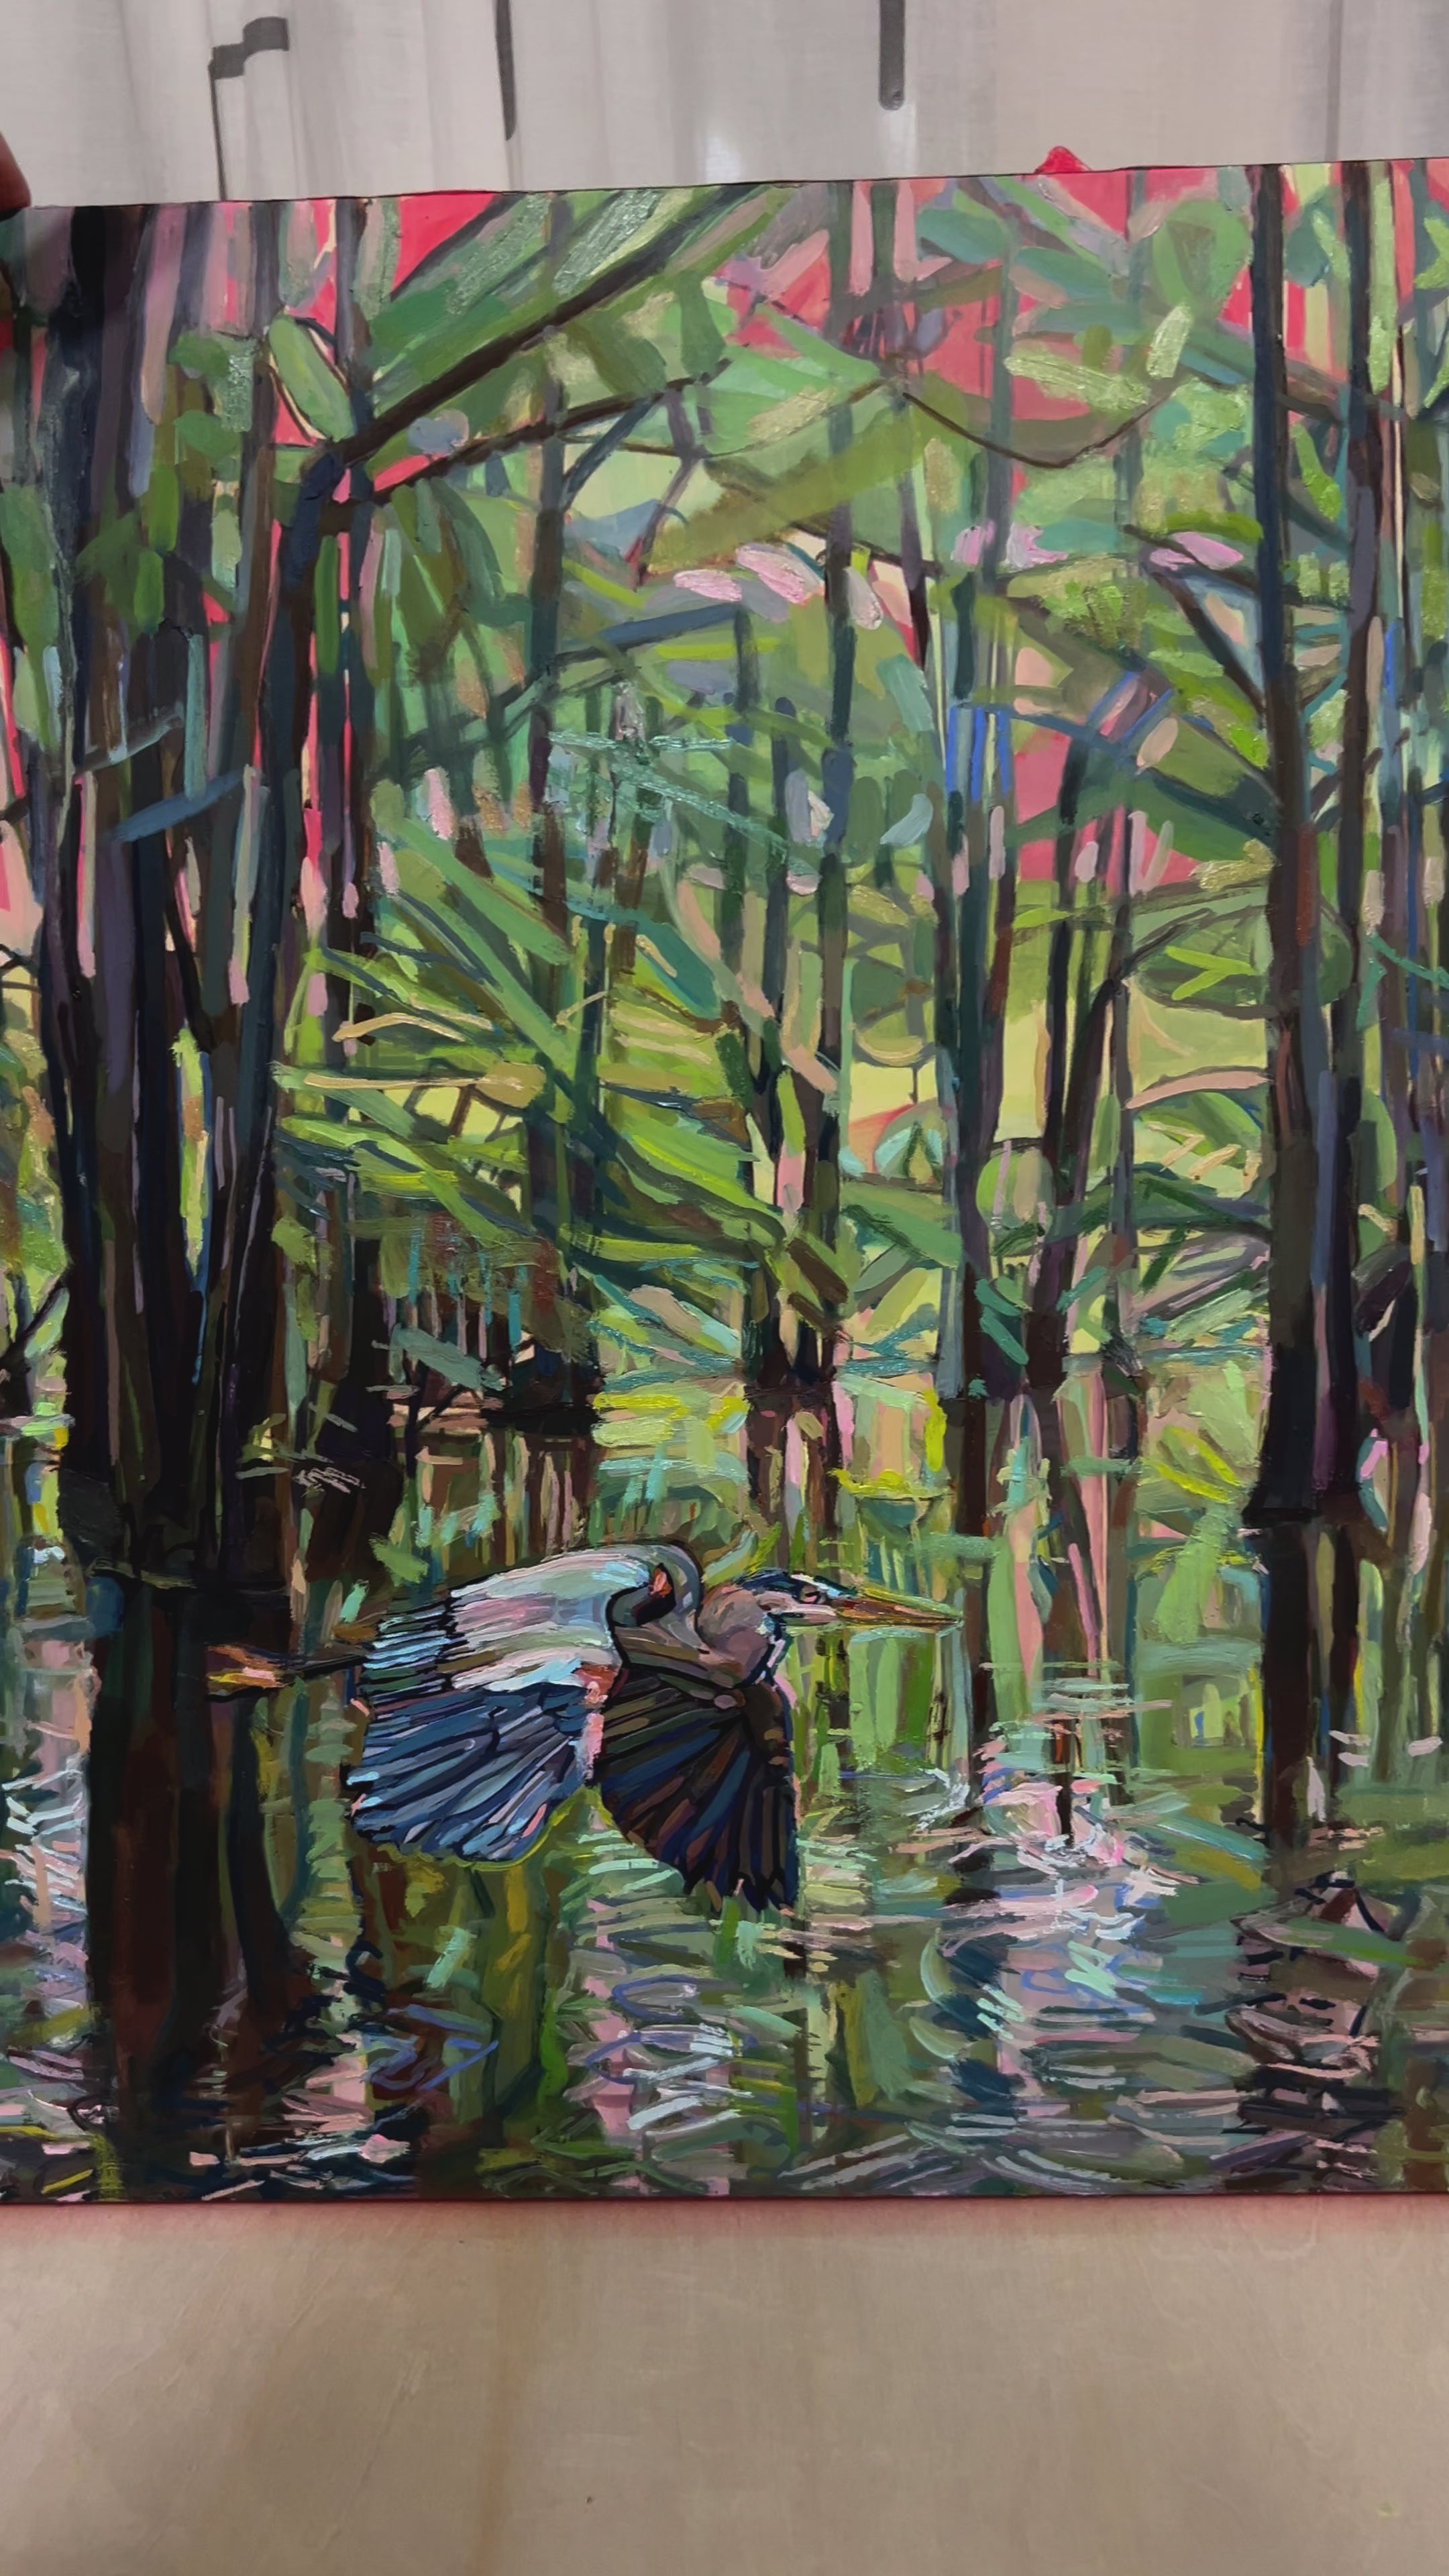 Blue Heron painting with Cypress Trees, wildlife colorful oil painting of Caddo Lake by Texas artist Courtney Holder